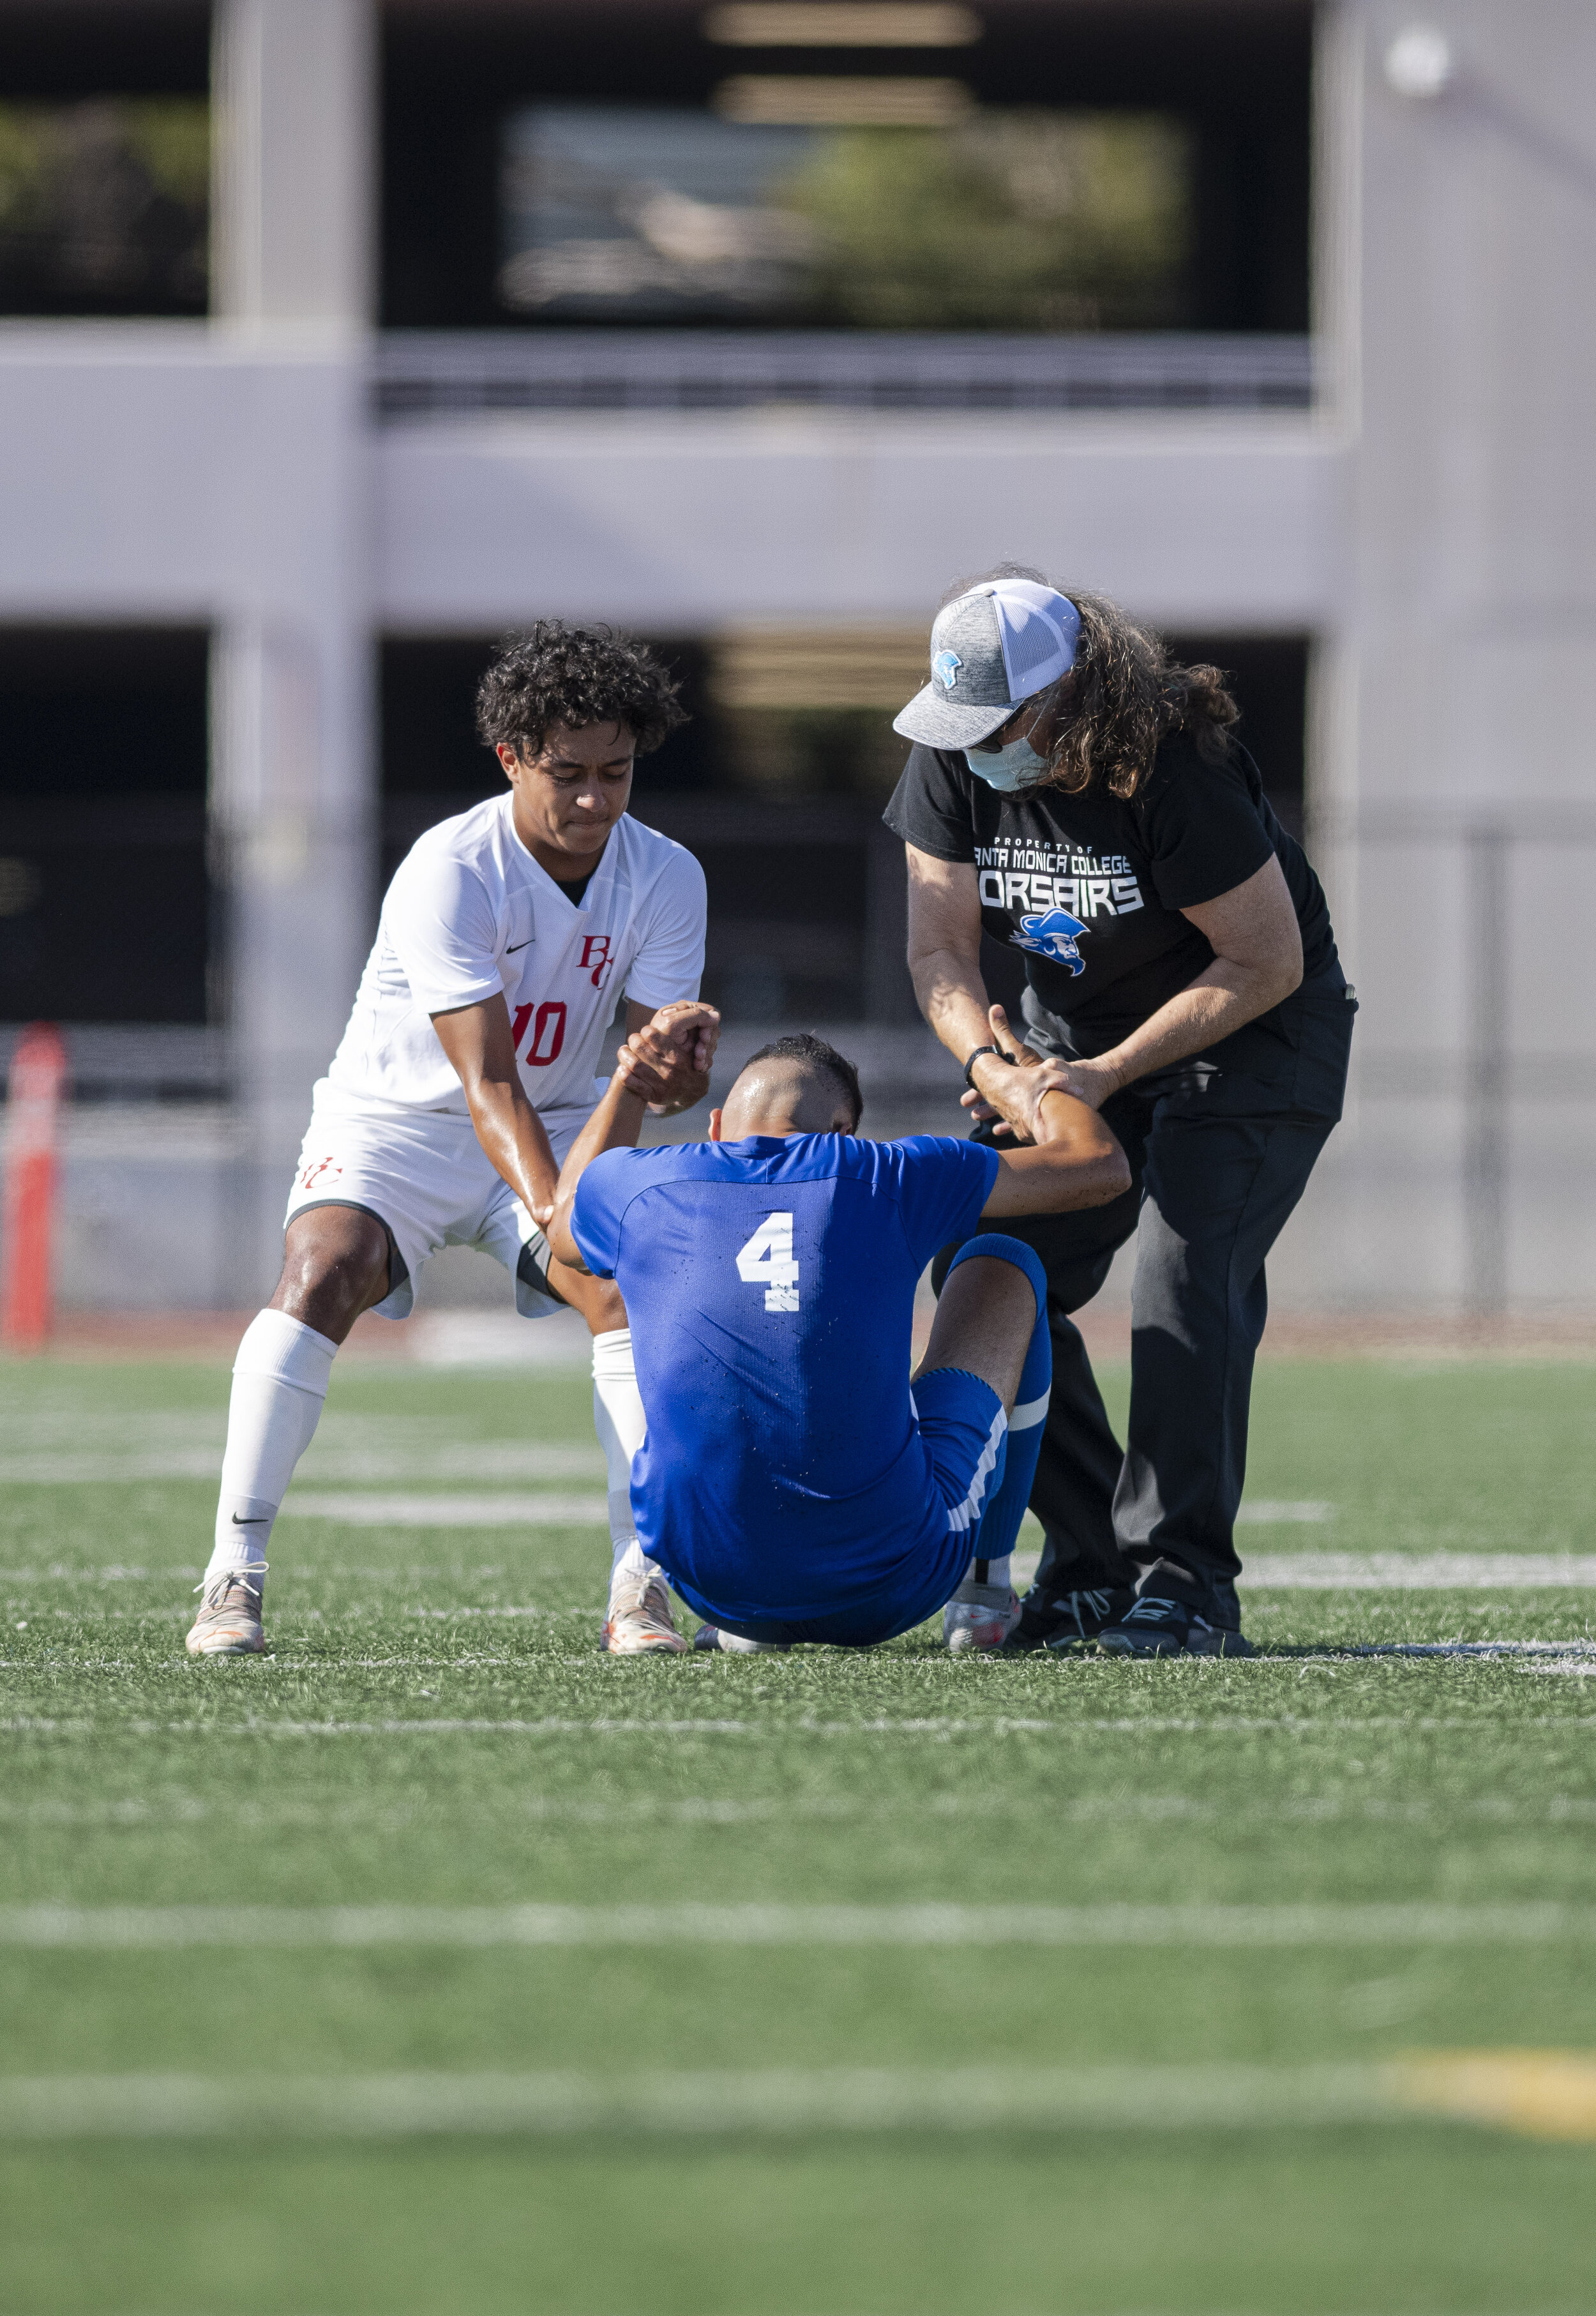  Santa Monica College Corsairs freshman Josh Rodriguez (4) gets helped up by the Bakersfield opponet that fouled him and the Santa Monica College Physical Therapist after a brutal collision. (Jon Putman | The Corsair) 